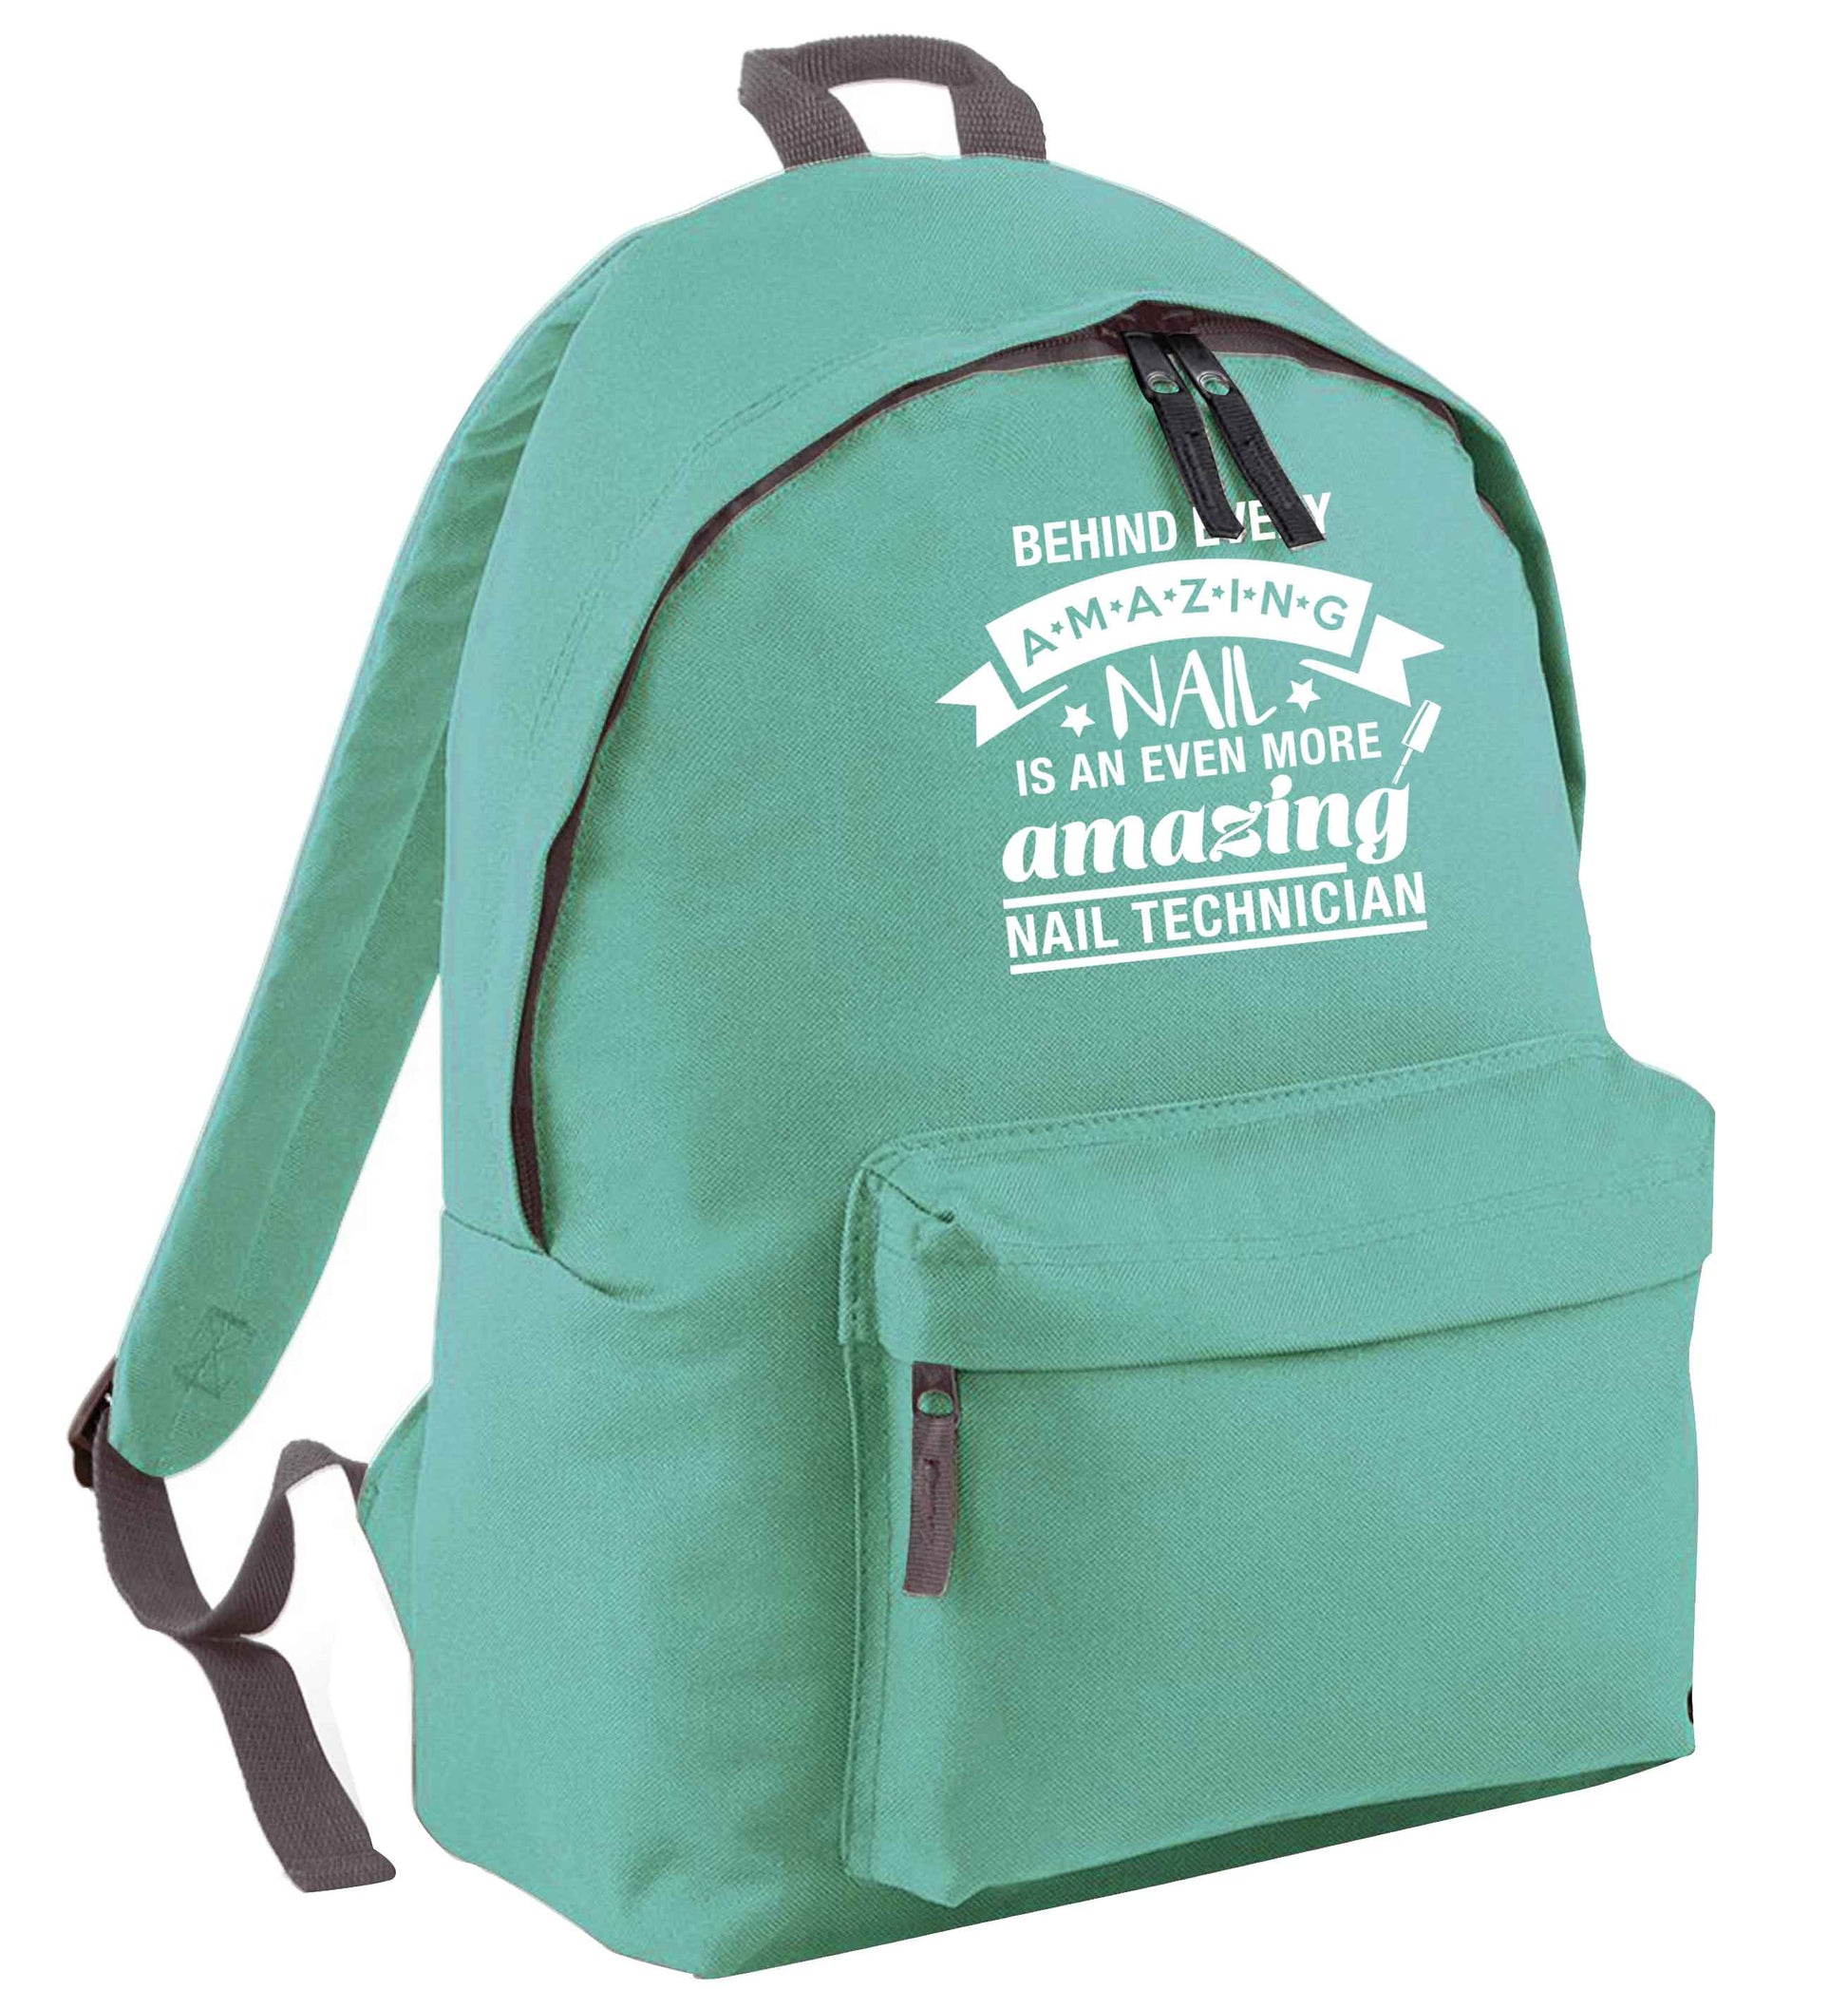 Behind every amazing nail is an even more amazing nail technician mint adults backpack